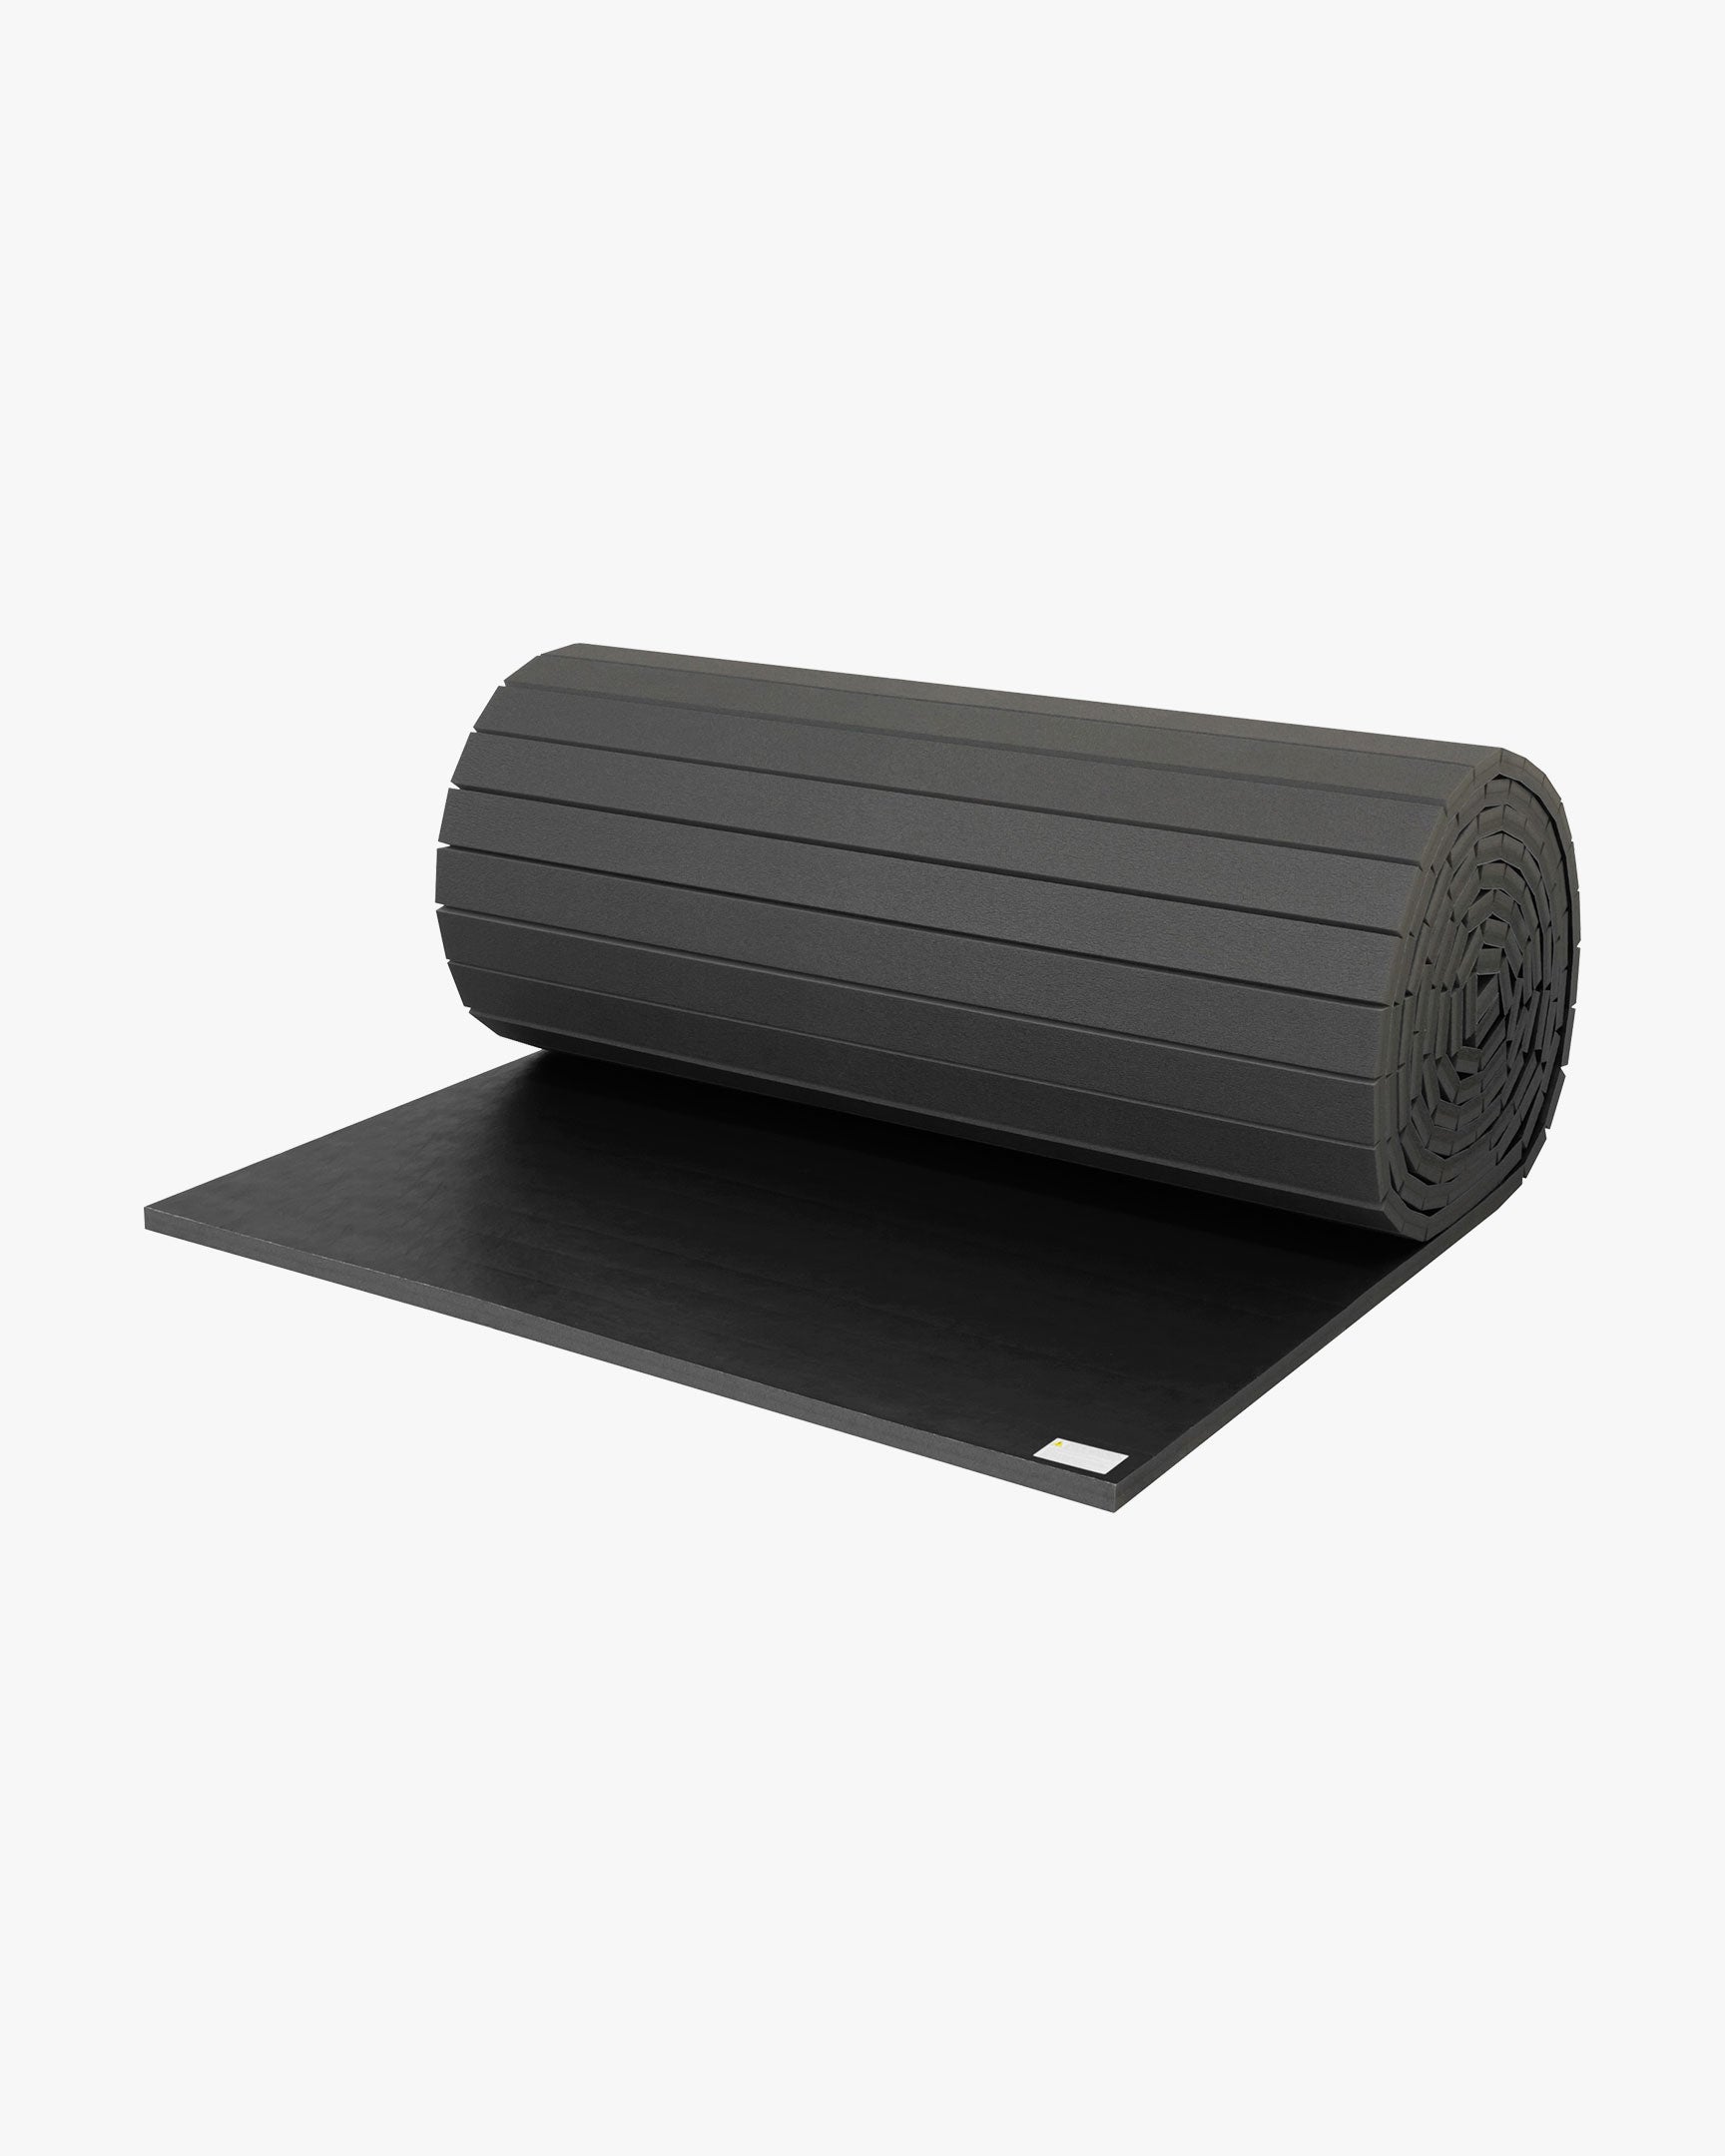 Custom Rollout Mat - .8 Inches Thick Black